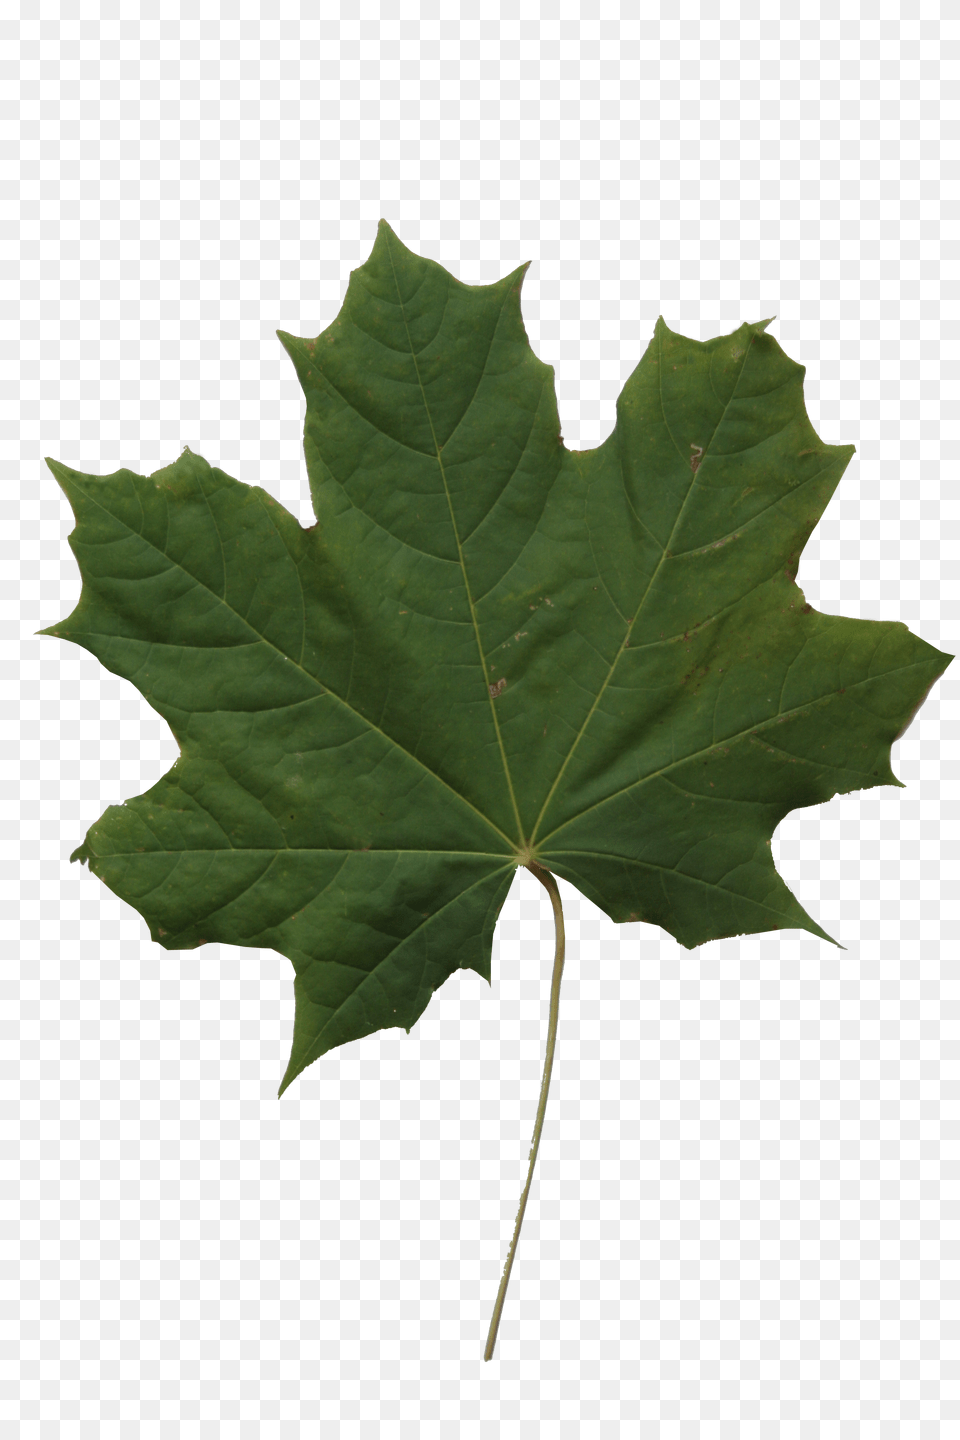 Maple Leaf Texture Cut Out People Trees And Leaves, Plant, Tree, Maple Leaf Free Transparent Png